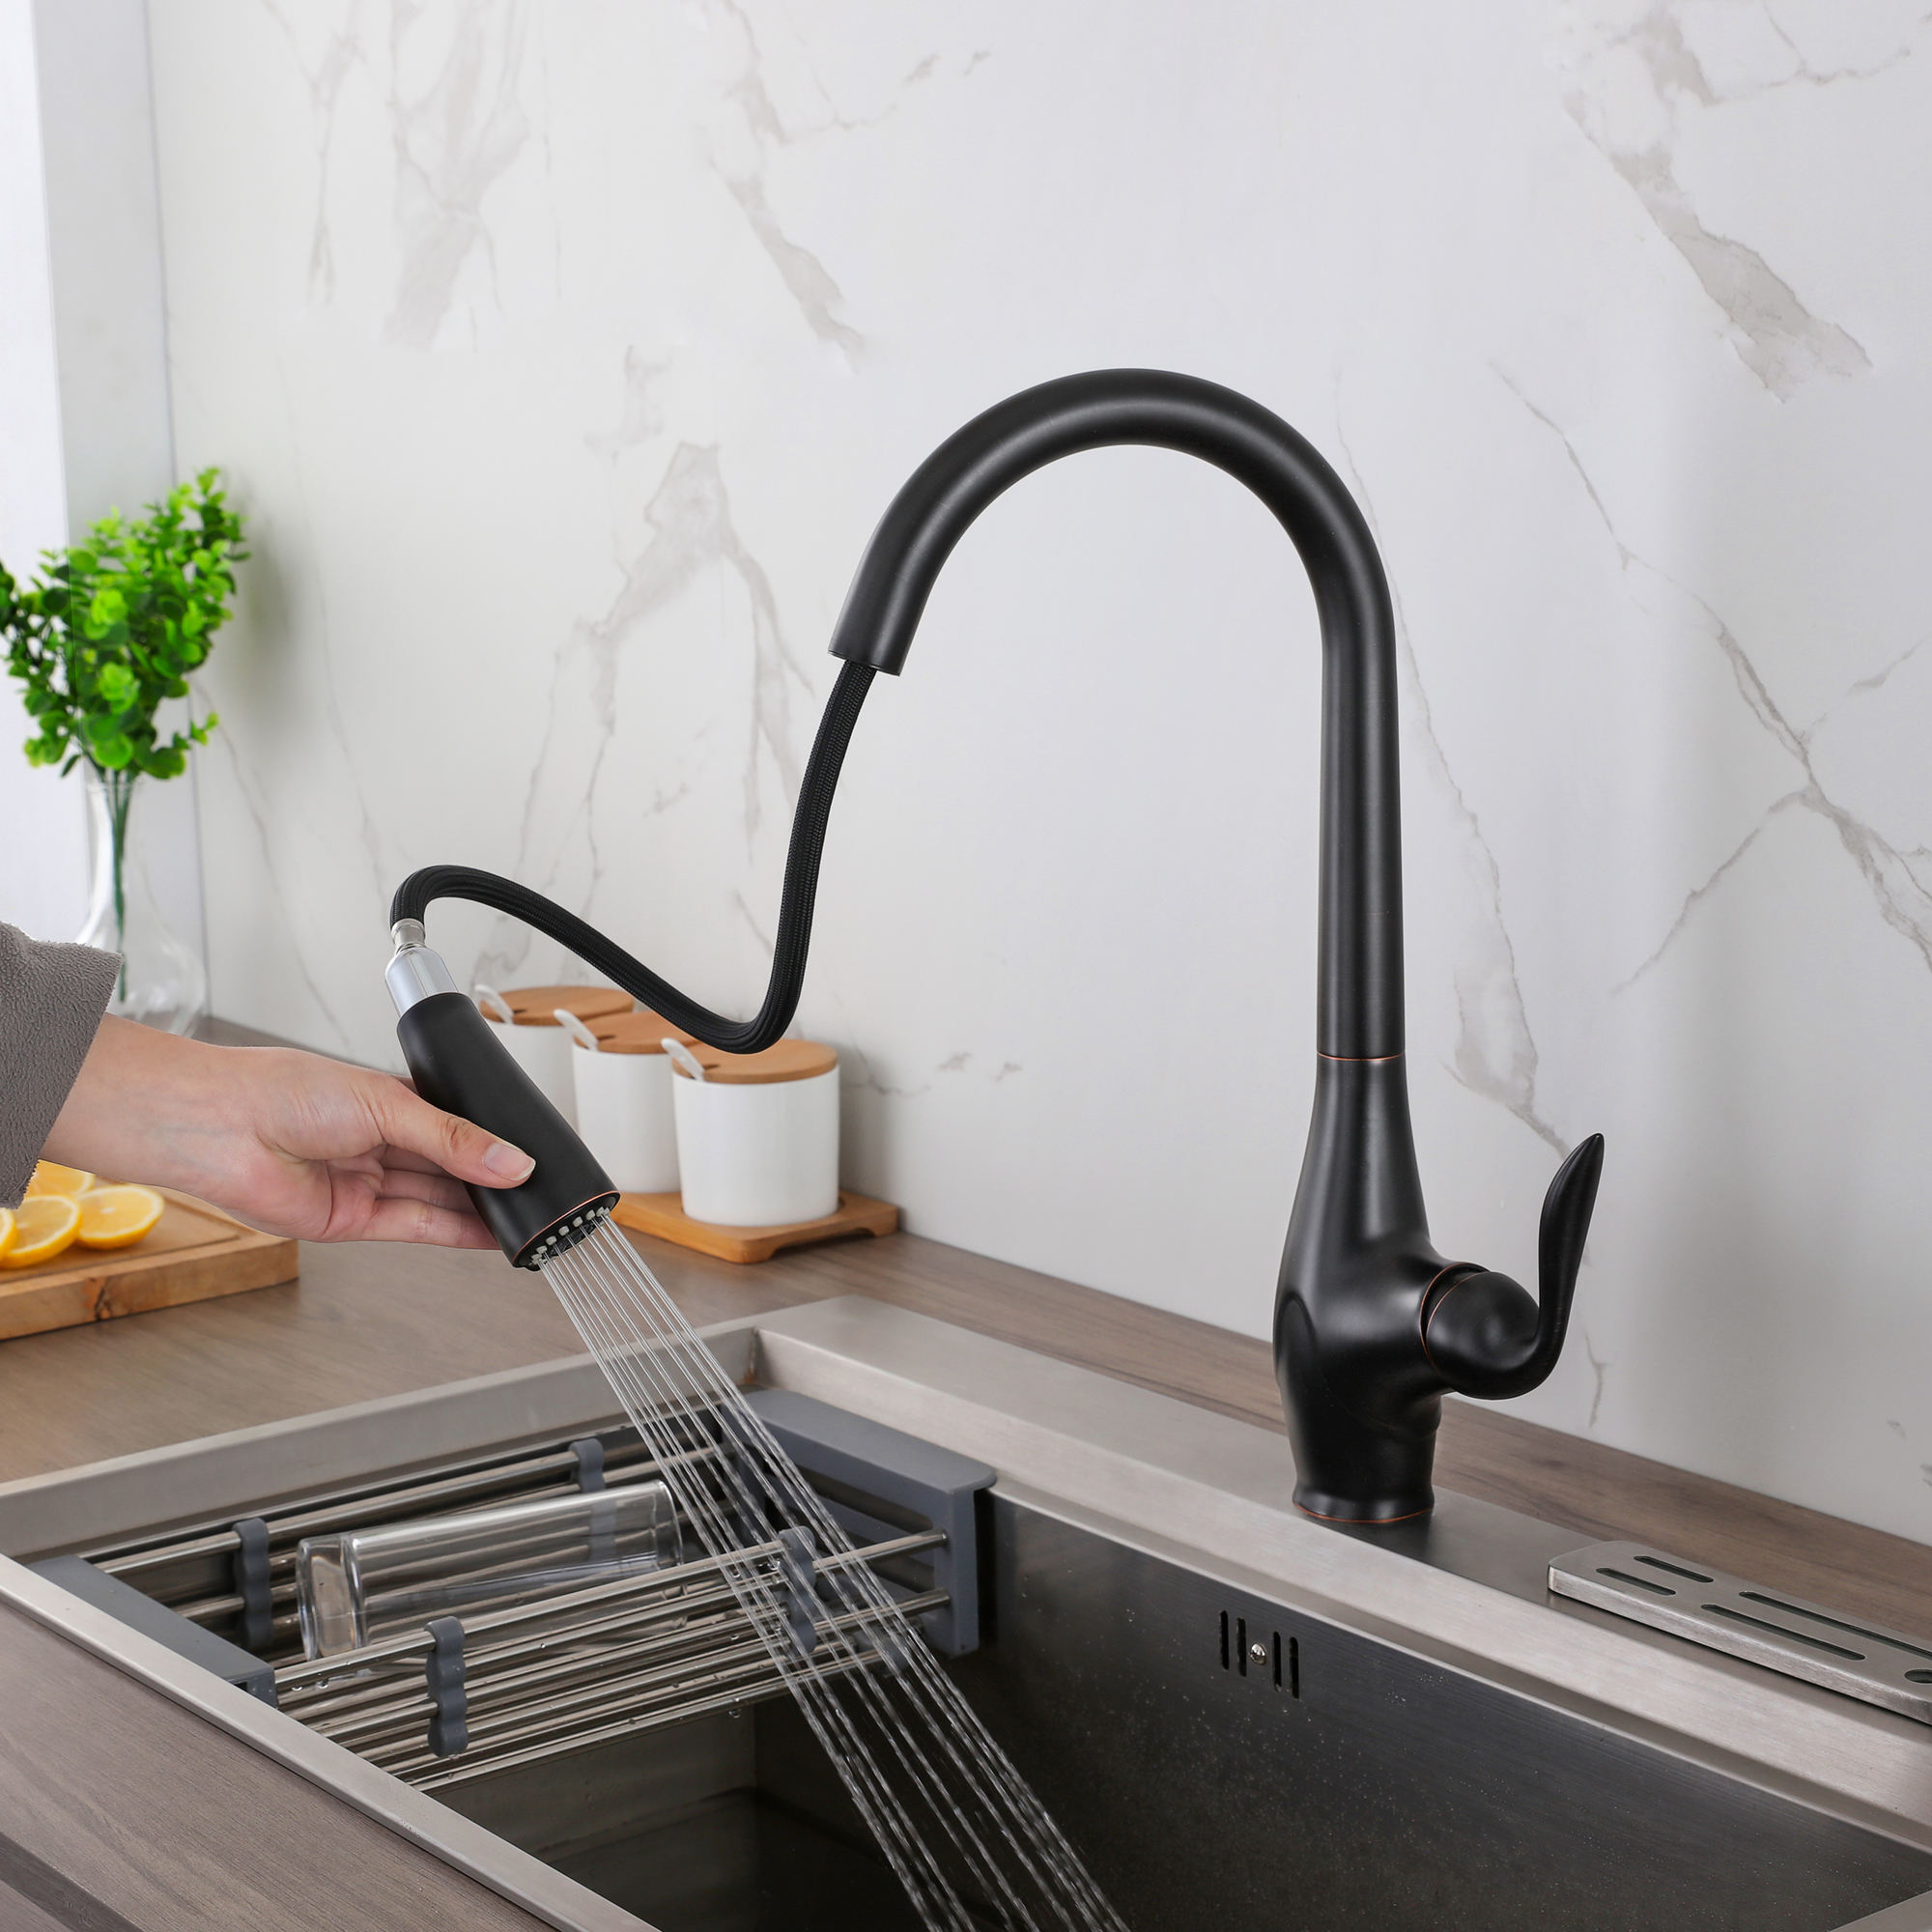 what are the best kitchen sink faucets